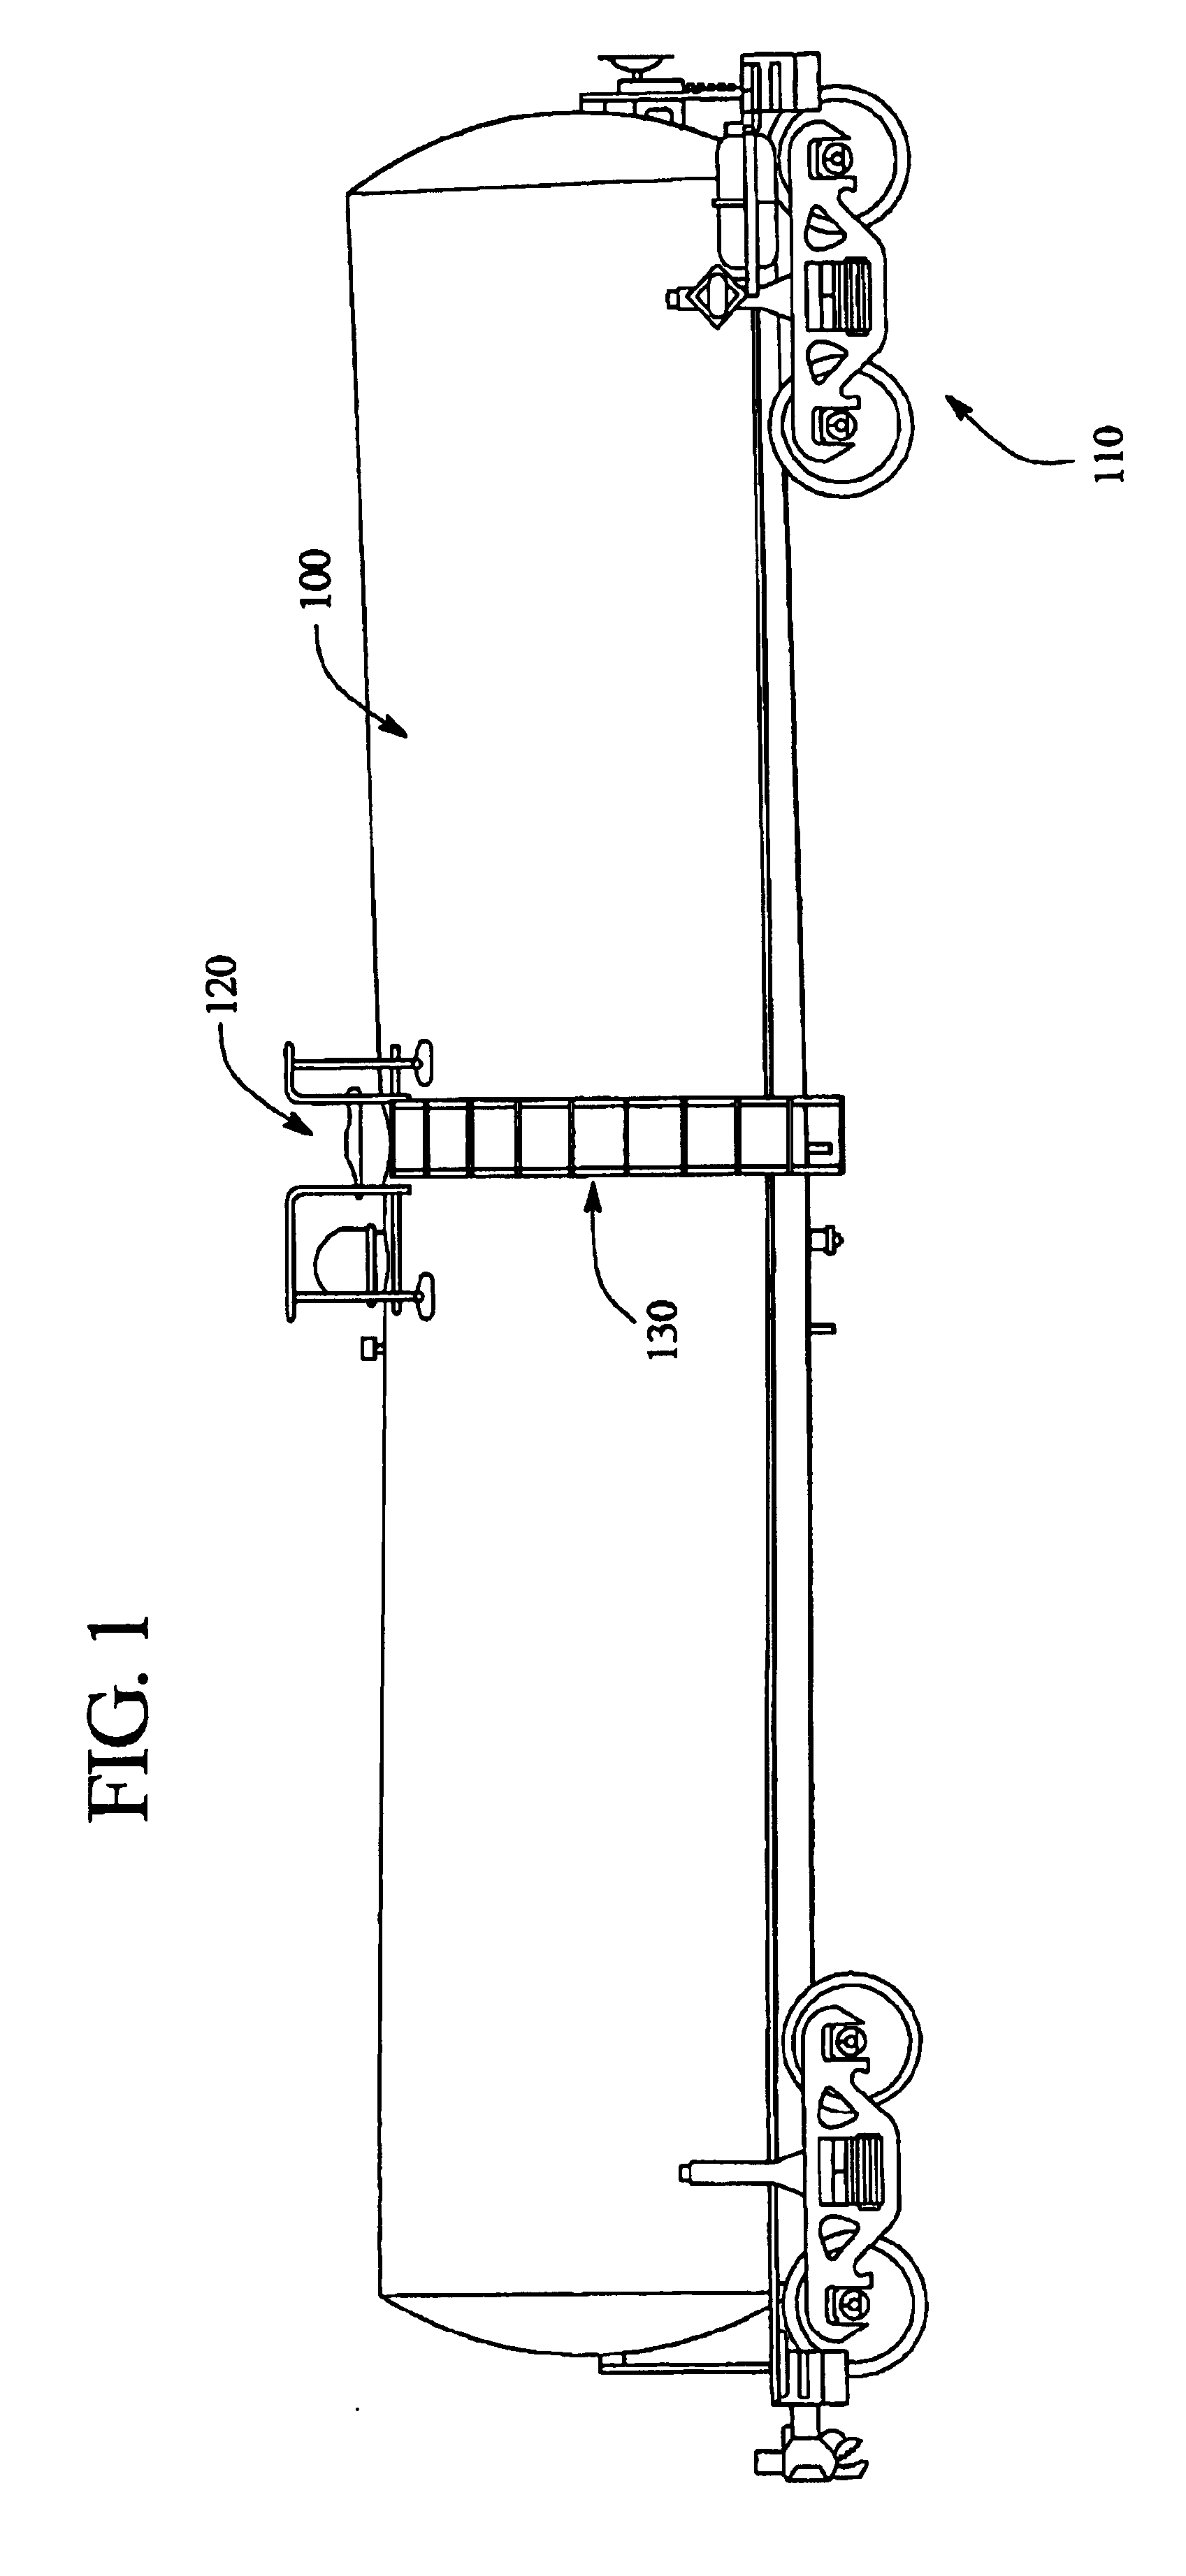 Method and arrangement for inspection and requalification of vehicles used for transporting commodities and/or hazardous materials